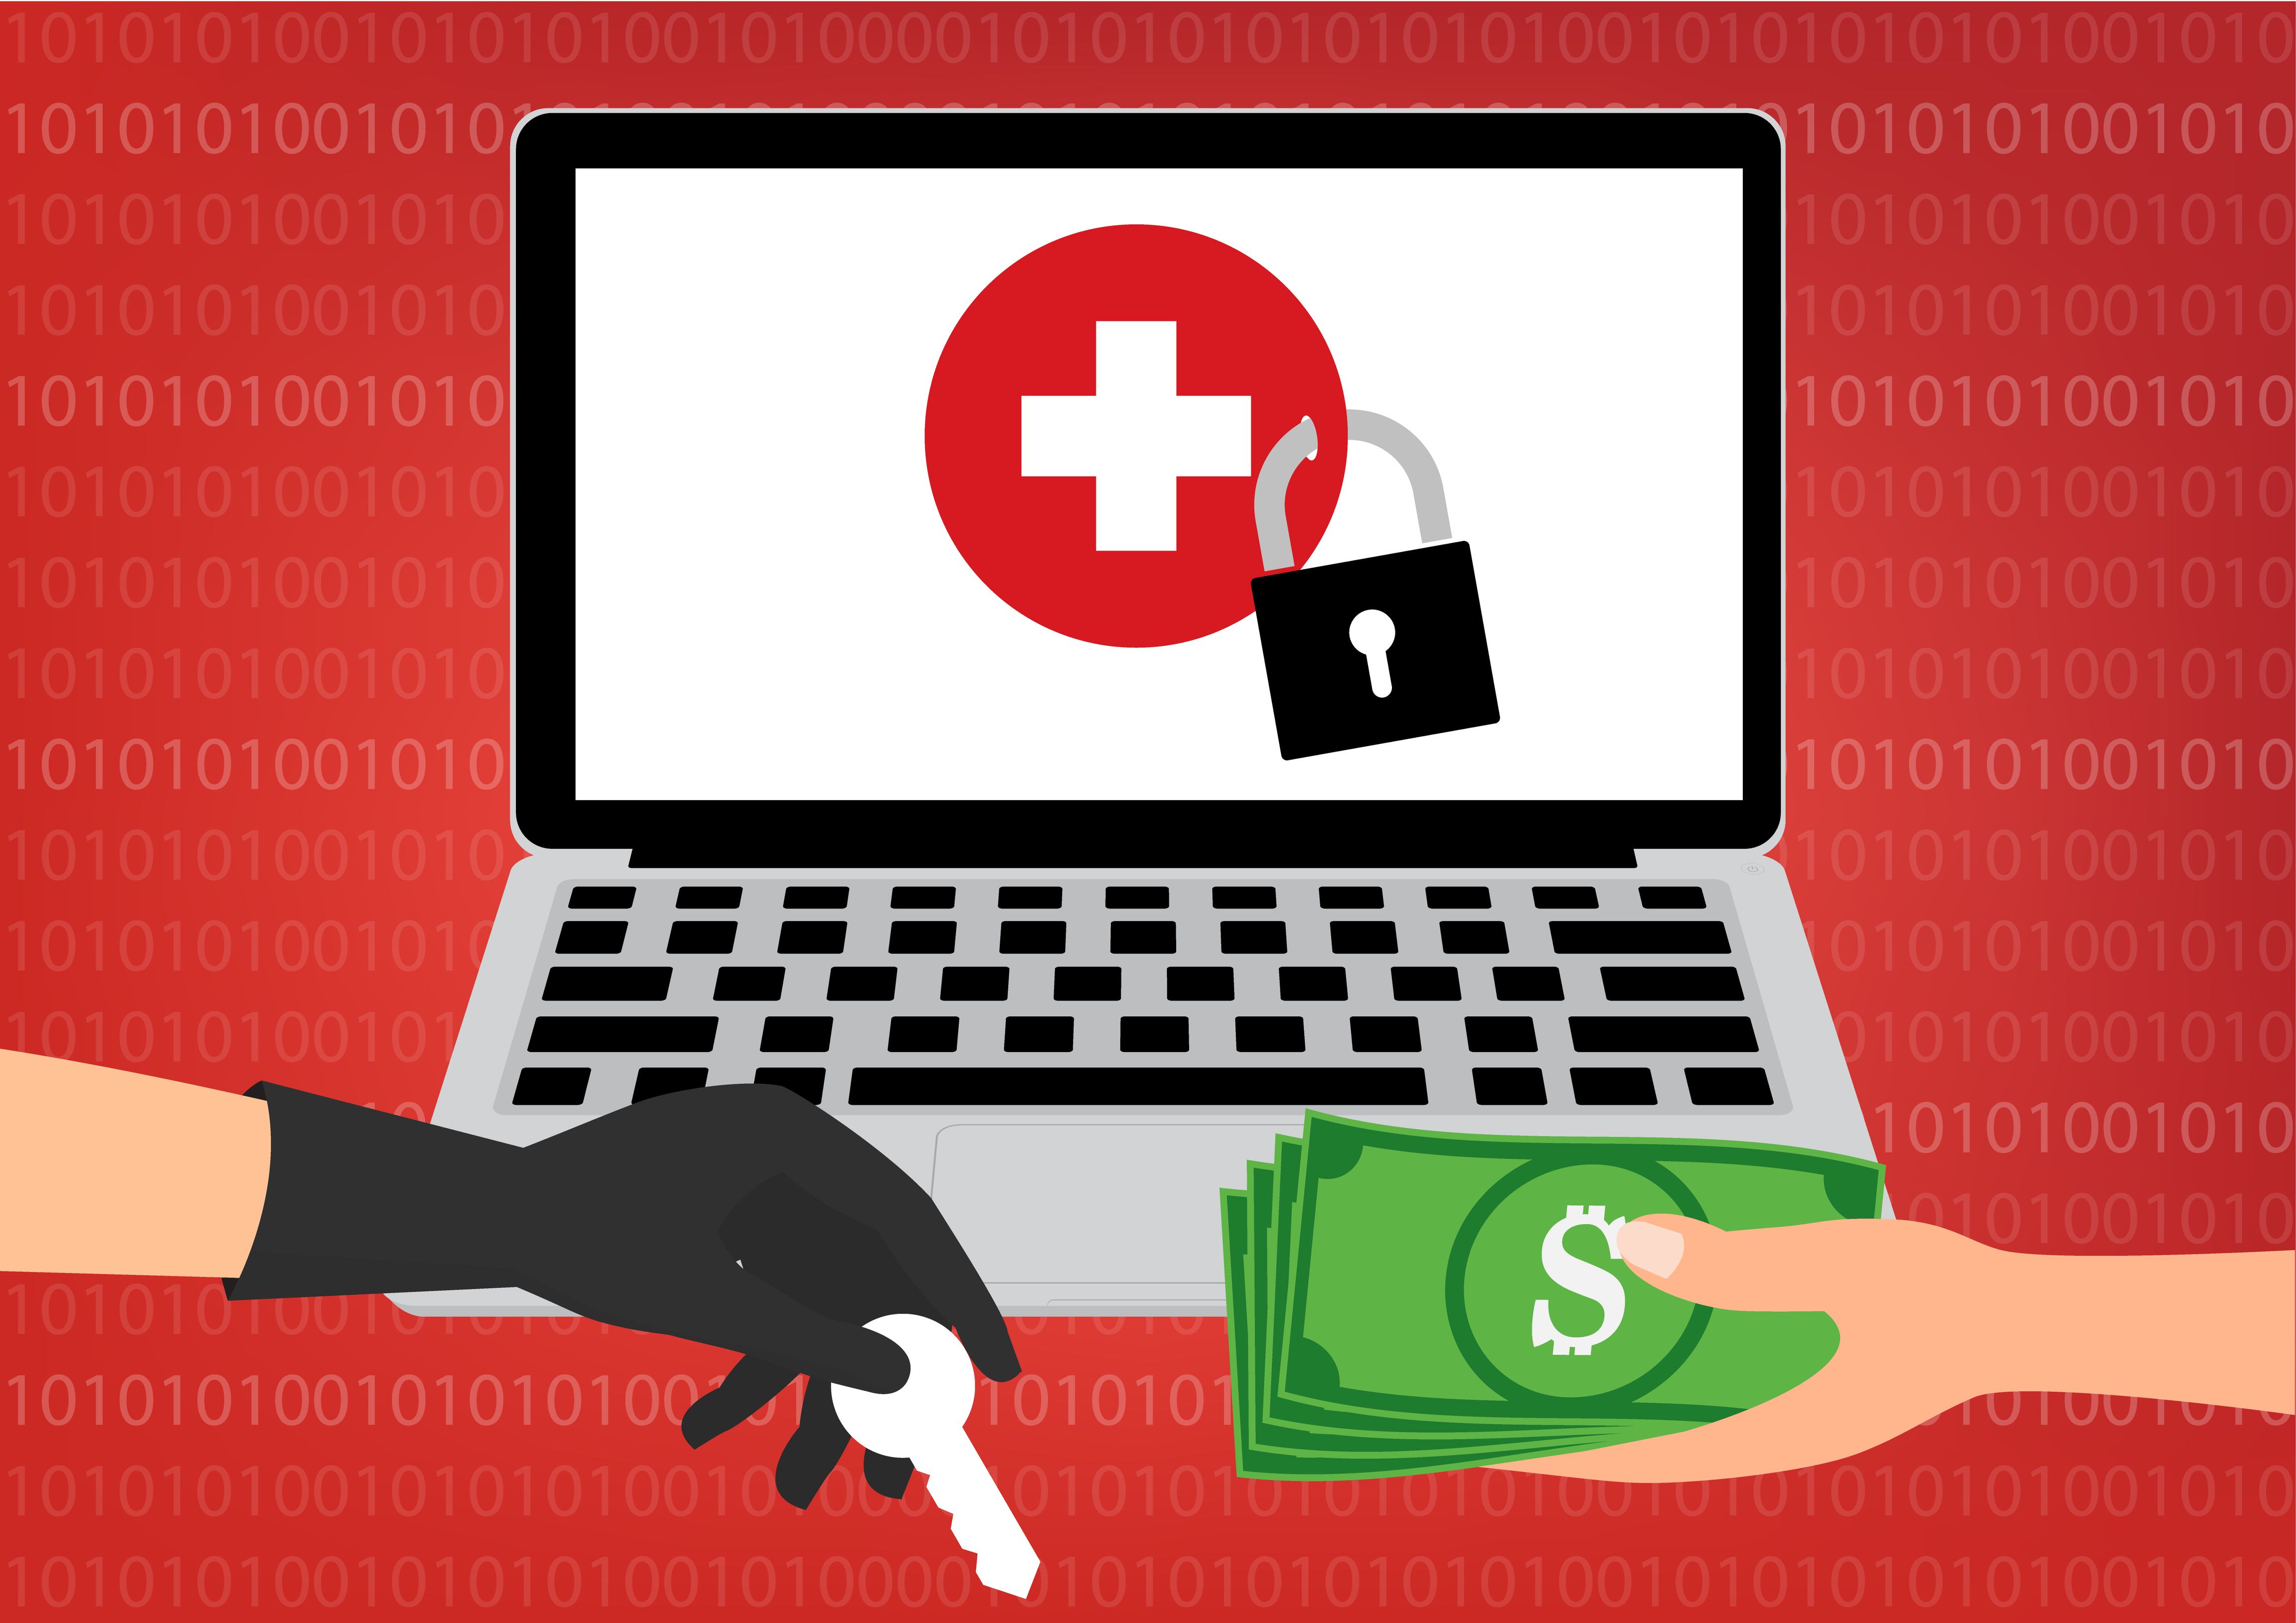 Addressing Ransomware in Healthcare